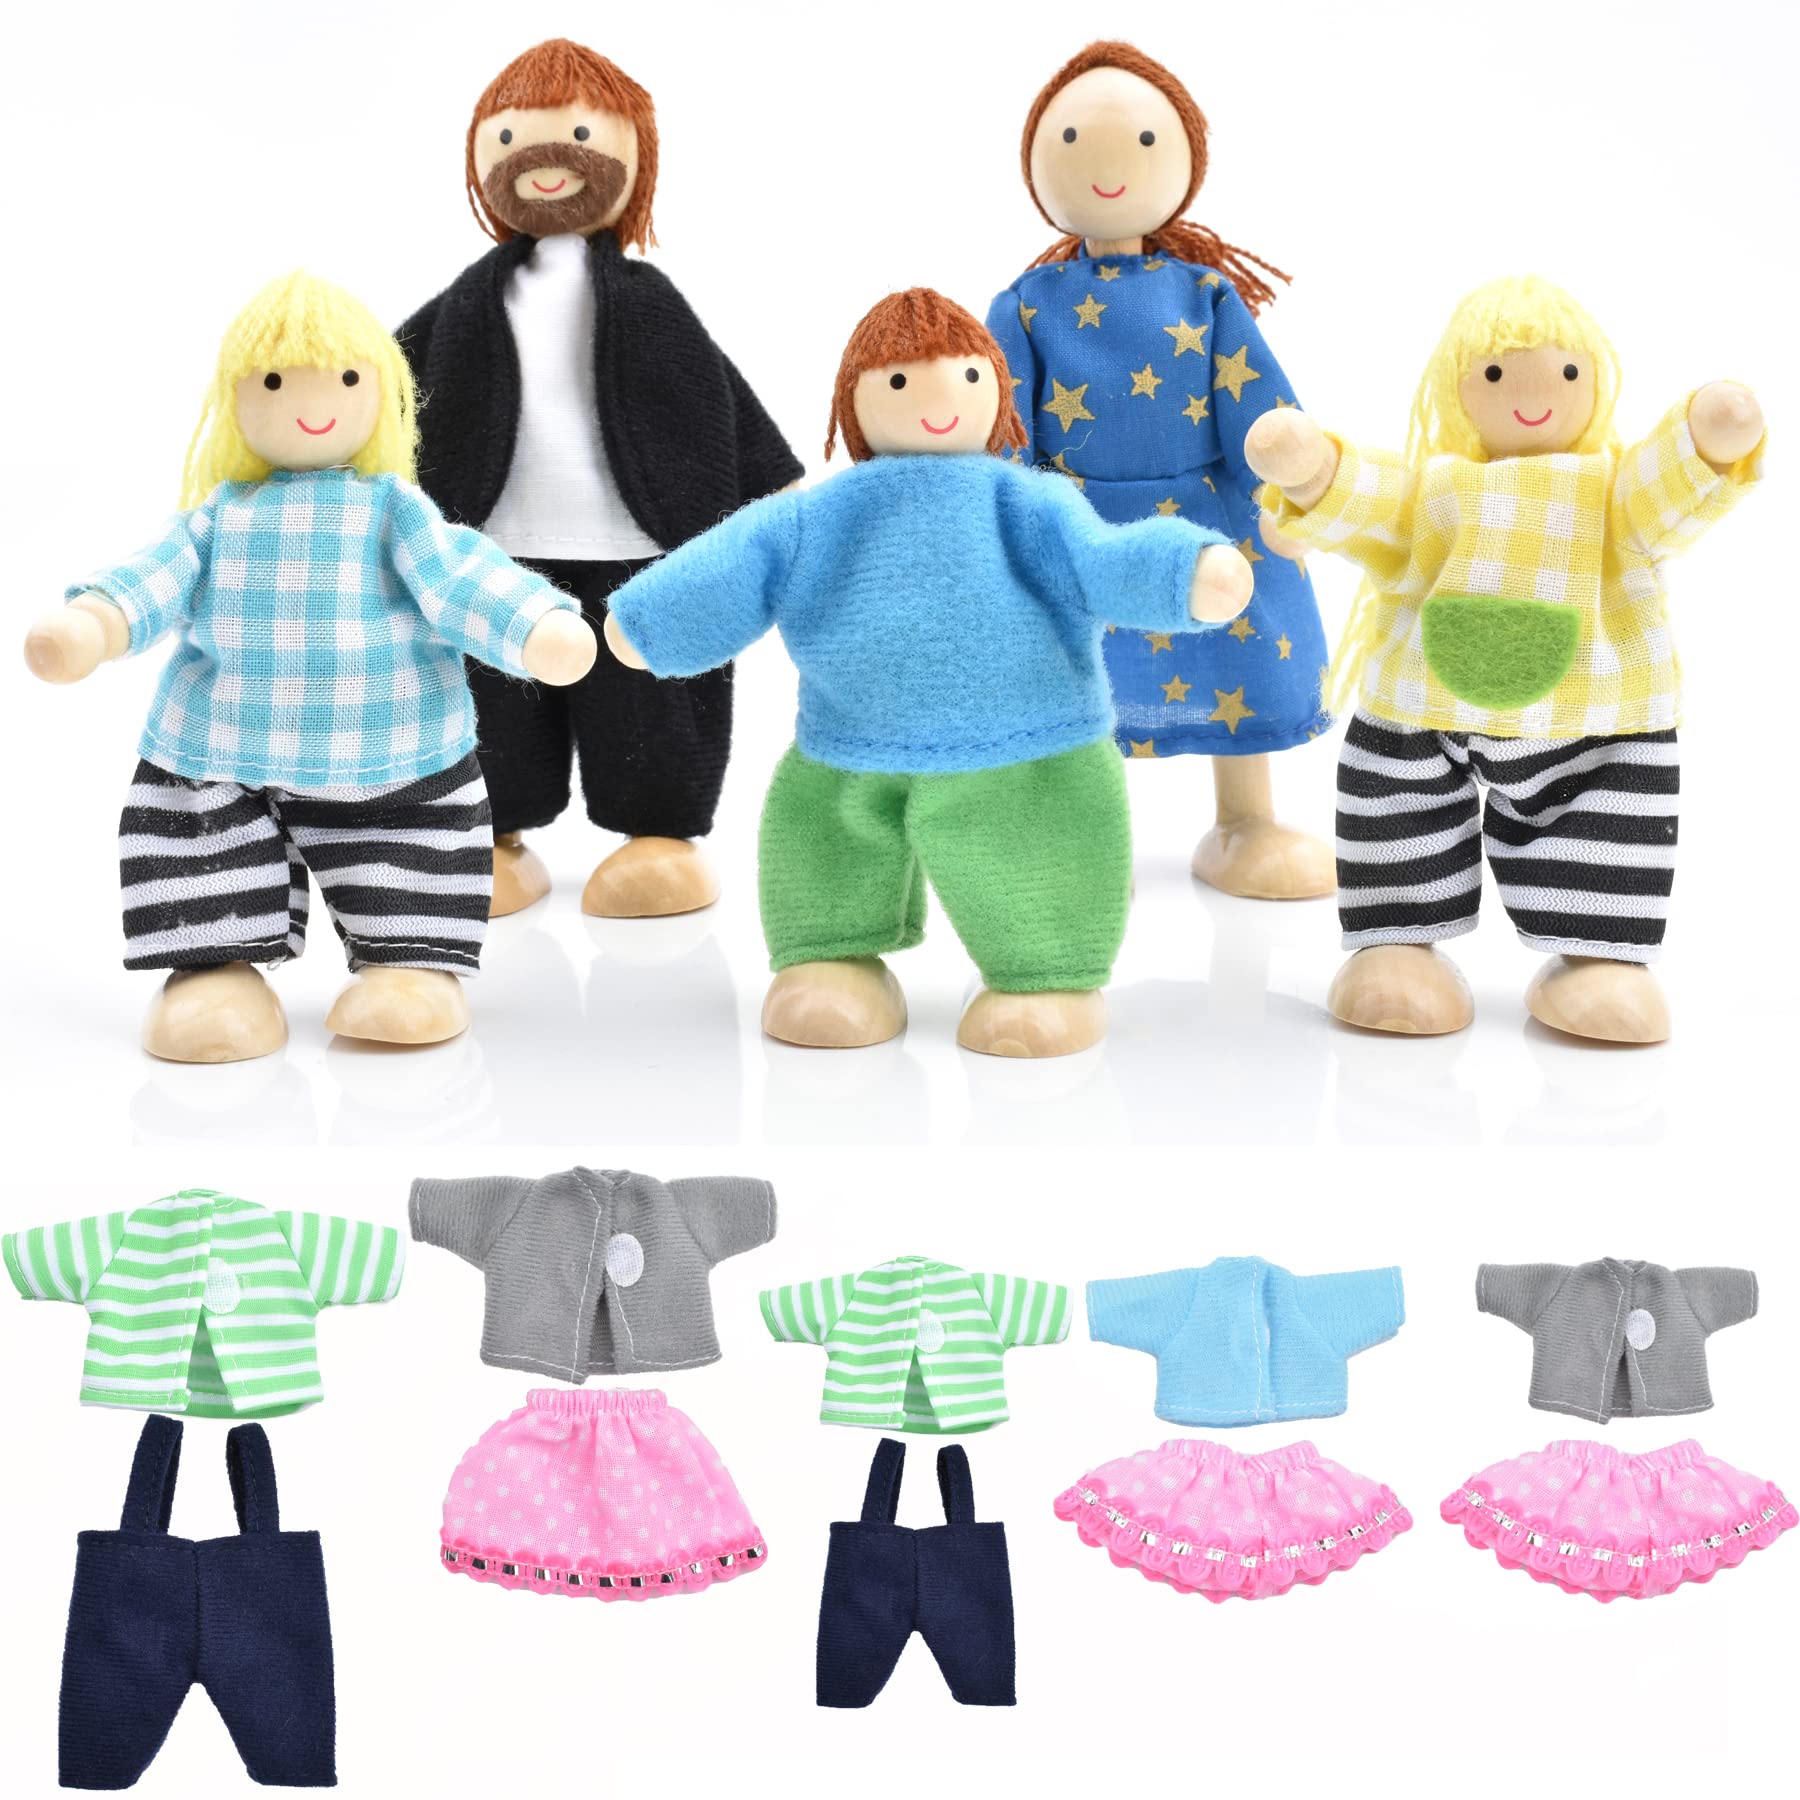 Wooden Family Dollhouse People with Set of Doll Clothes, Family Figures with Removeable Clothes for Dollhouse Pretend Play